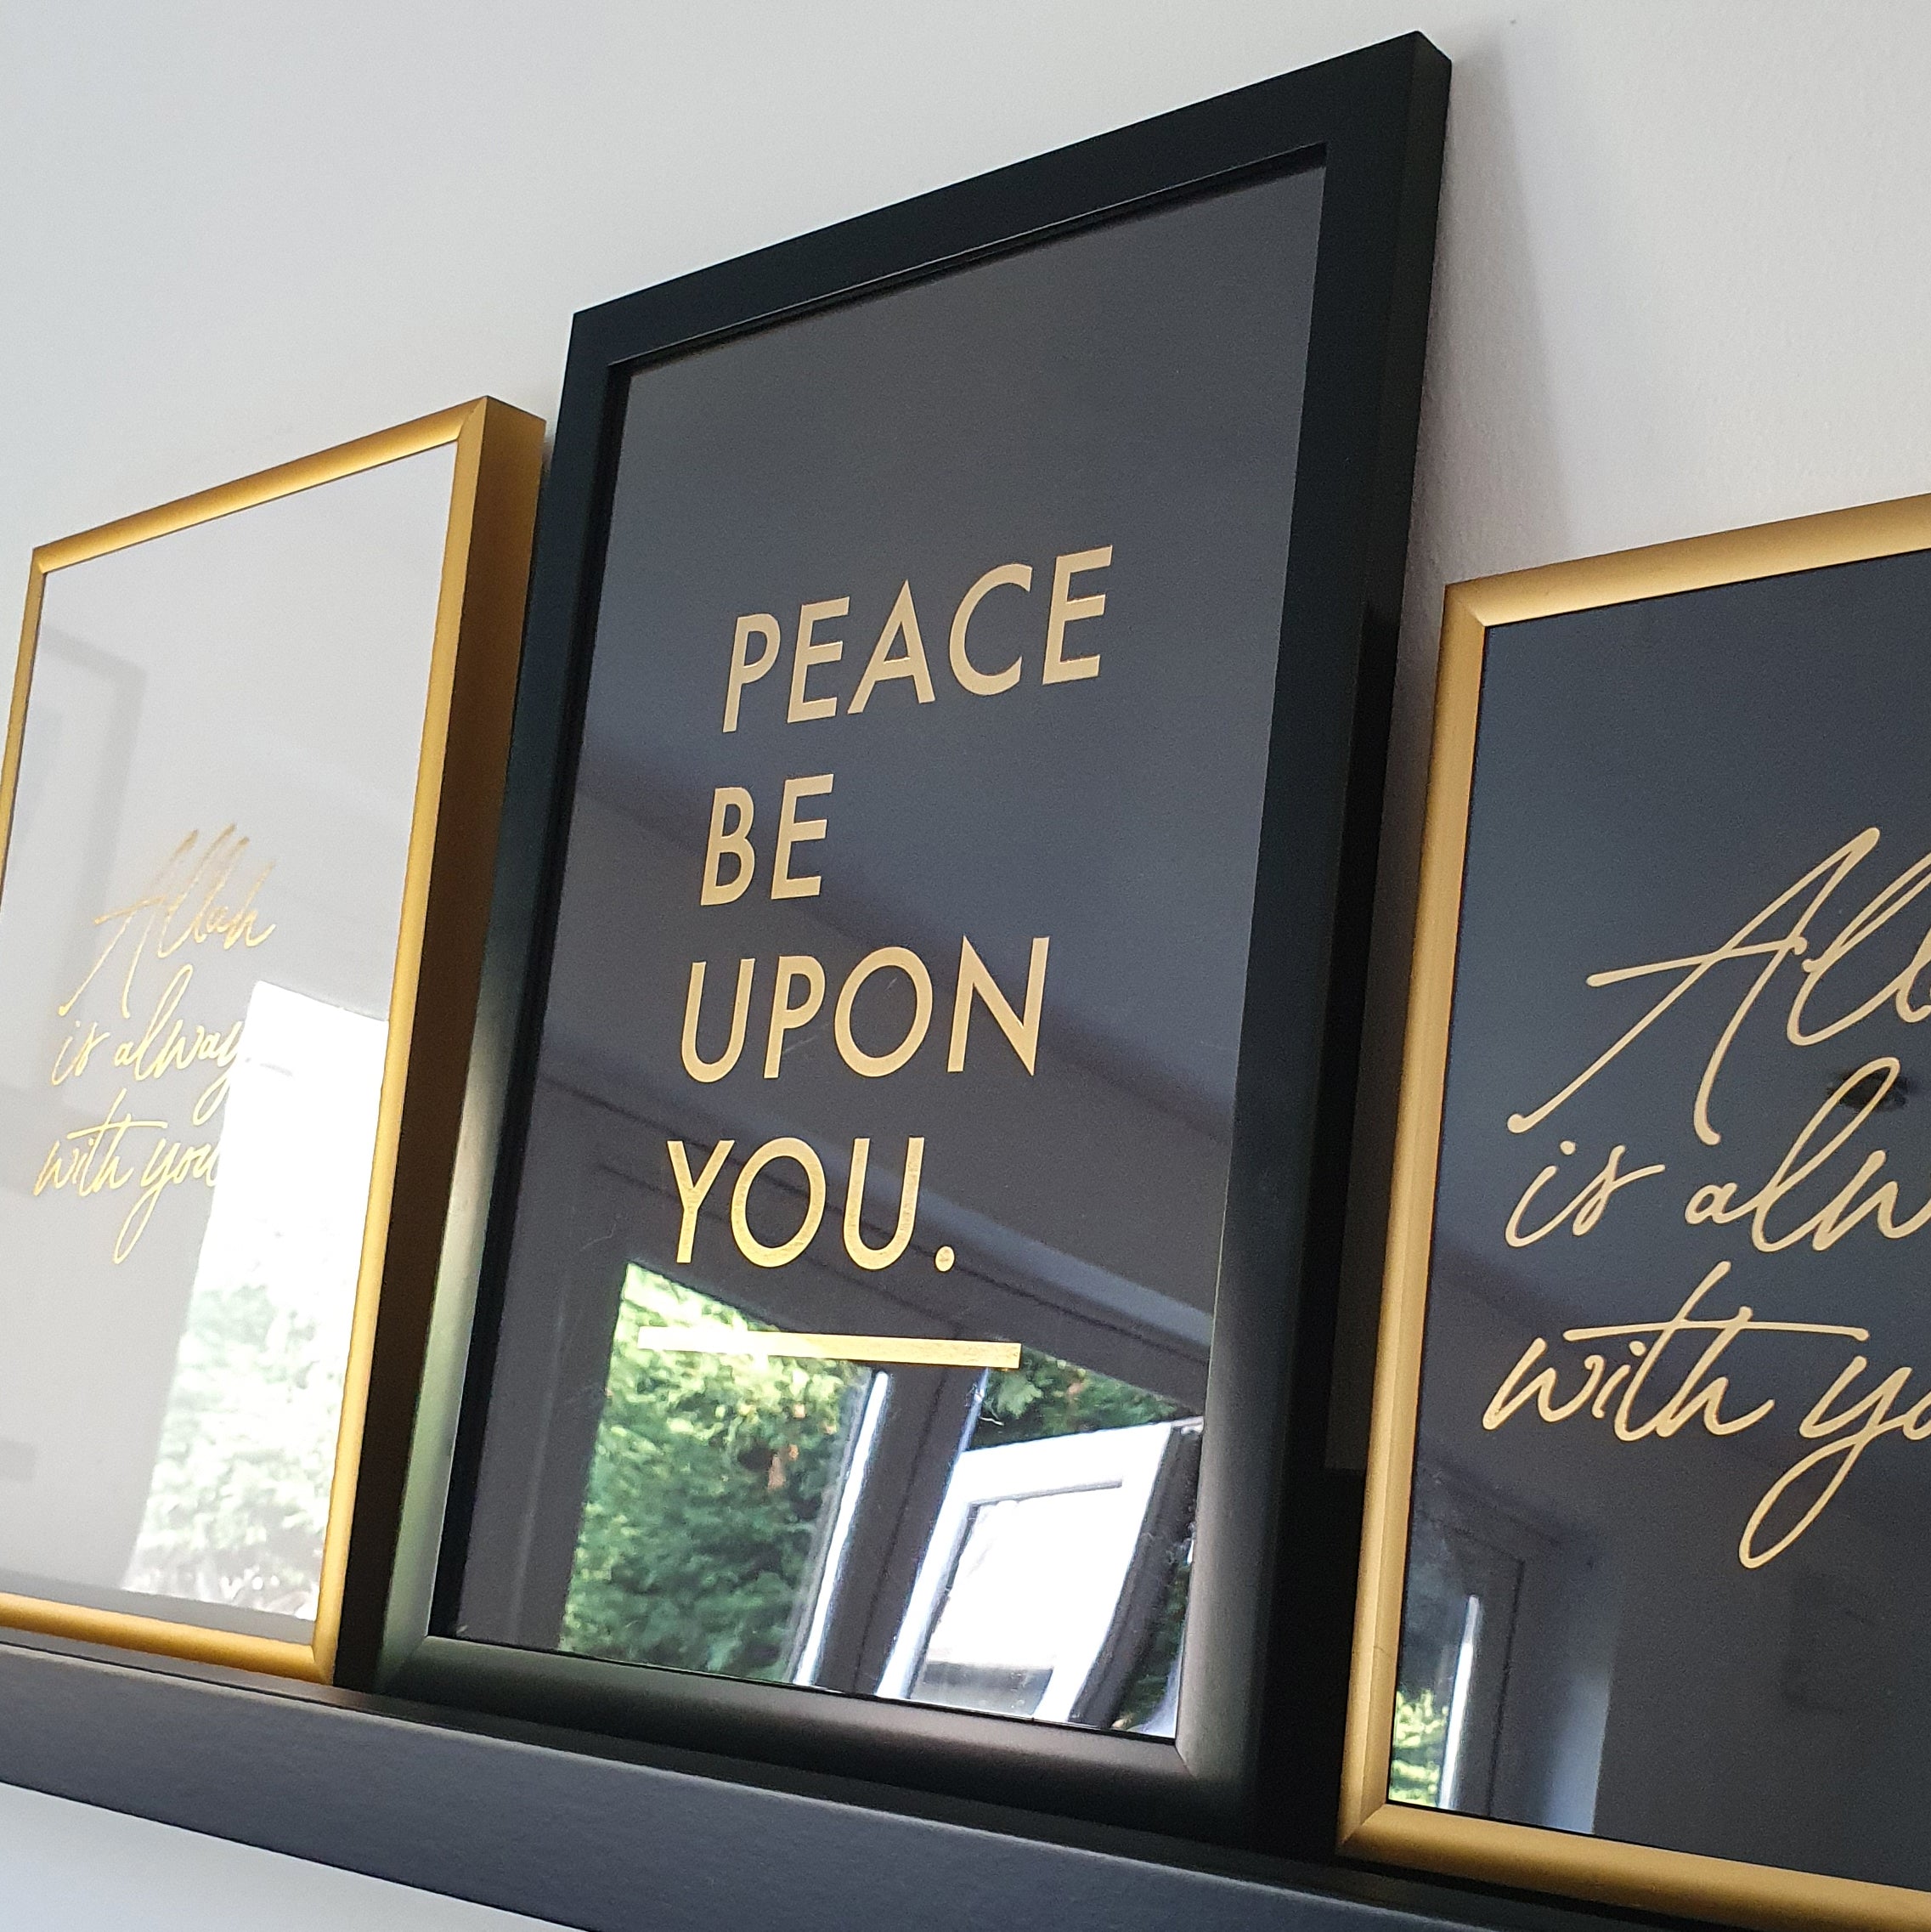 Peace be upon you Gold letter press print by Safar London